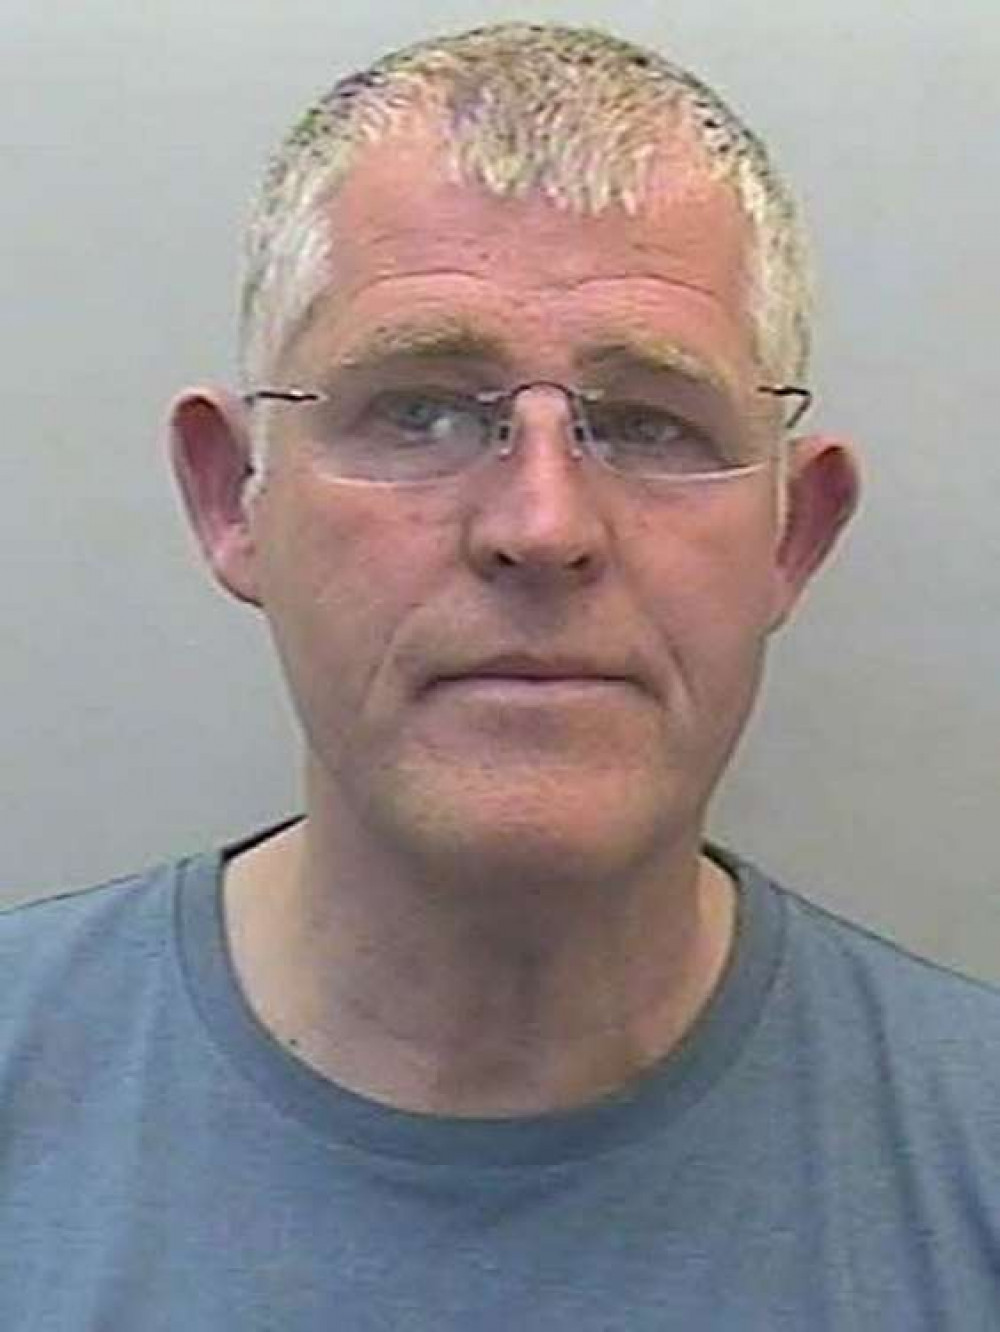 Convicted sex offender and former East Devon councillor John Humphreys. Credit: Devon and Cornwall Police